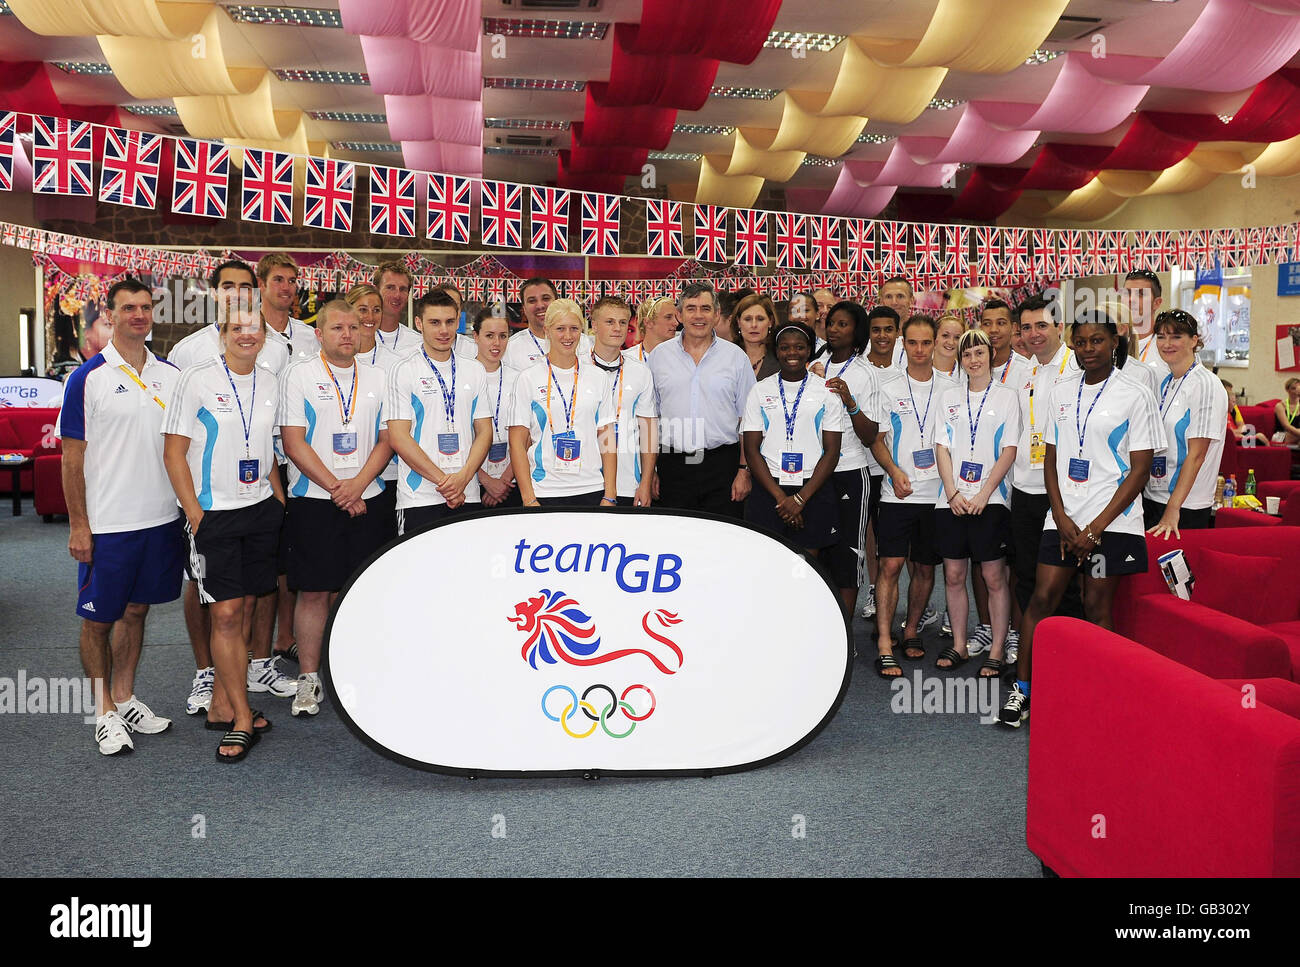 RETRANSMISSION with improved quality. Prime Minister Gordon Brown stands with members of Team GB during a visit to their Athletics Lodge in Beijing where he is attending the final days of the 2008 Olympic Games in China. Stock Photo